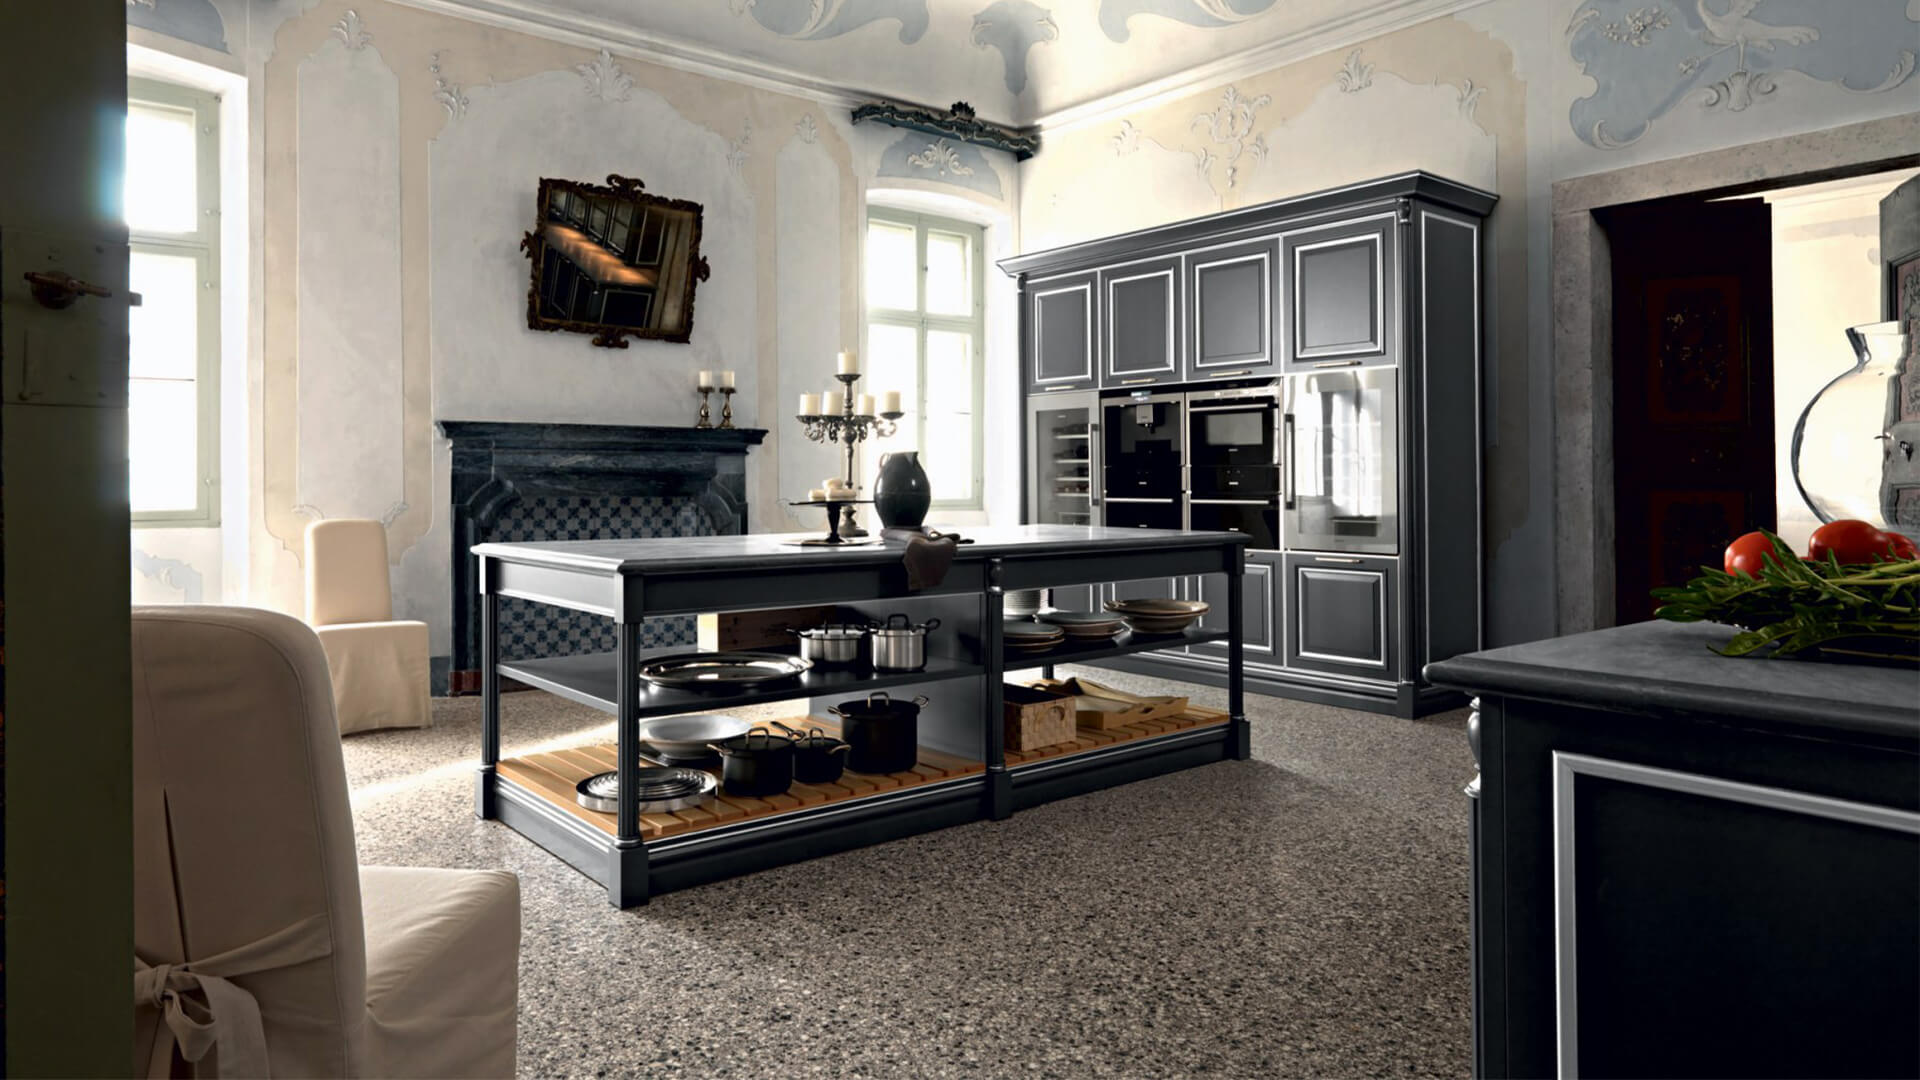 Blog IDW - Charcoal grey is all the fashion.......in interior design too!